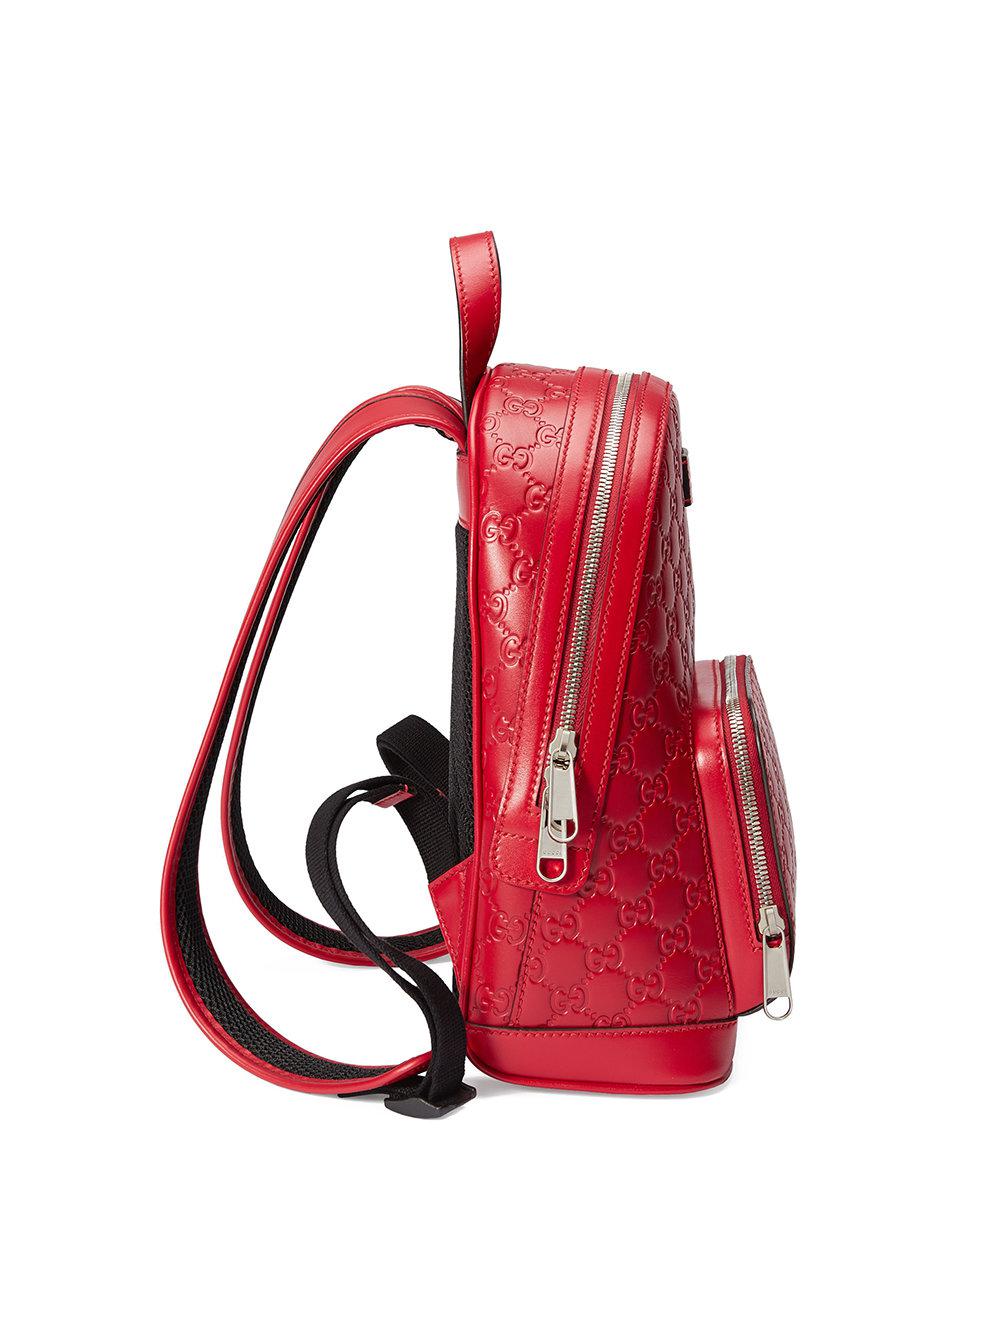 Gucci Signature Leather Backpack in Red for Men - Lyst